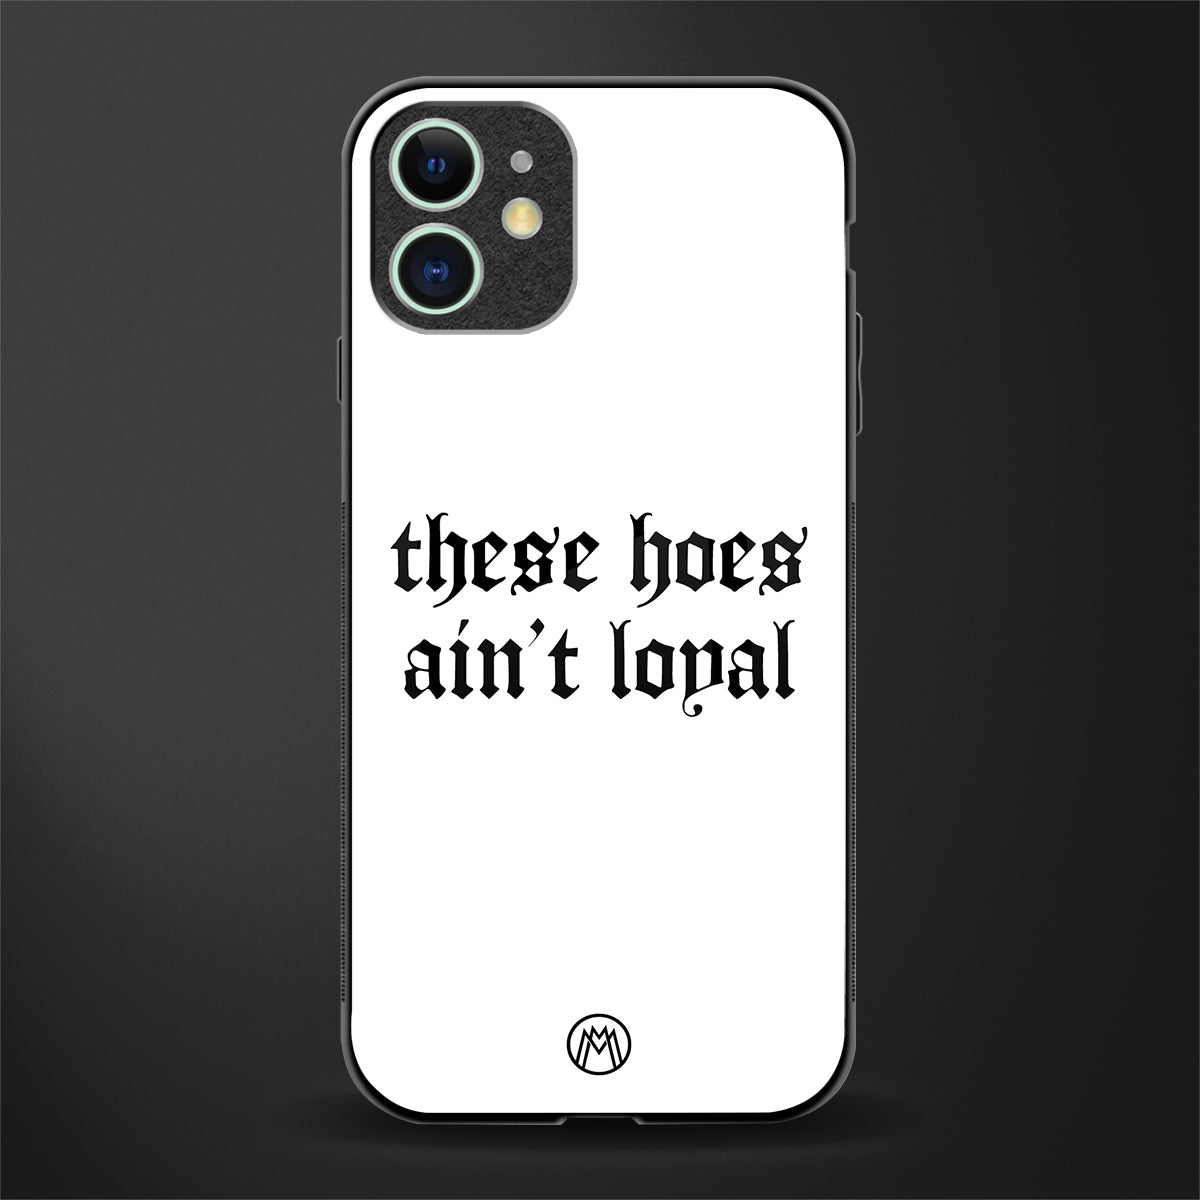 these_hoes_ain't_loyal for iphone 11 image